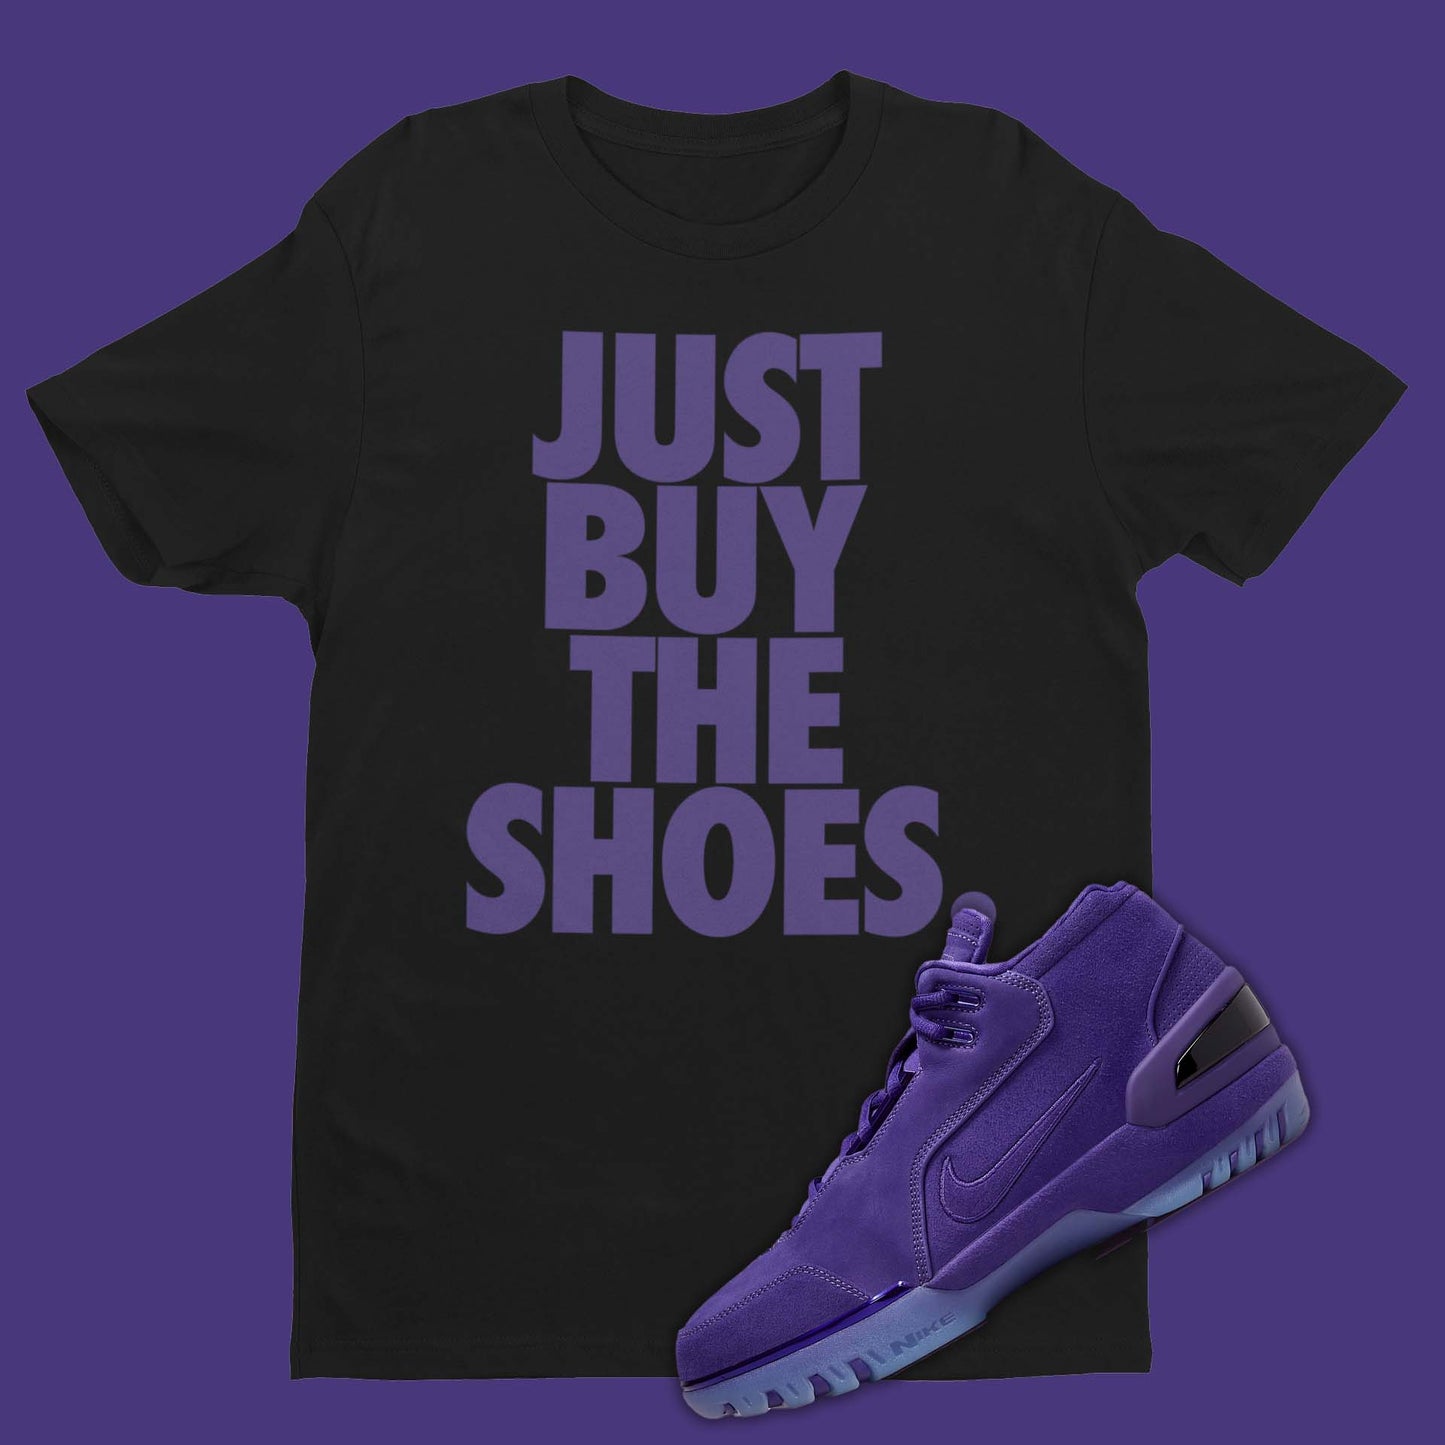 Nike Air Zoom Gneration Court Purple matching shirt in black with "Just Buy The Shoes" on front in purple